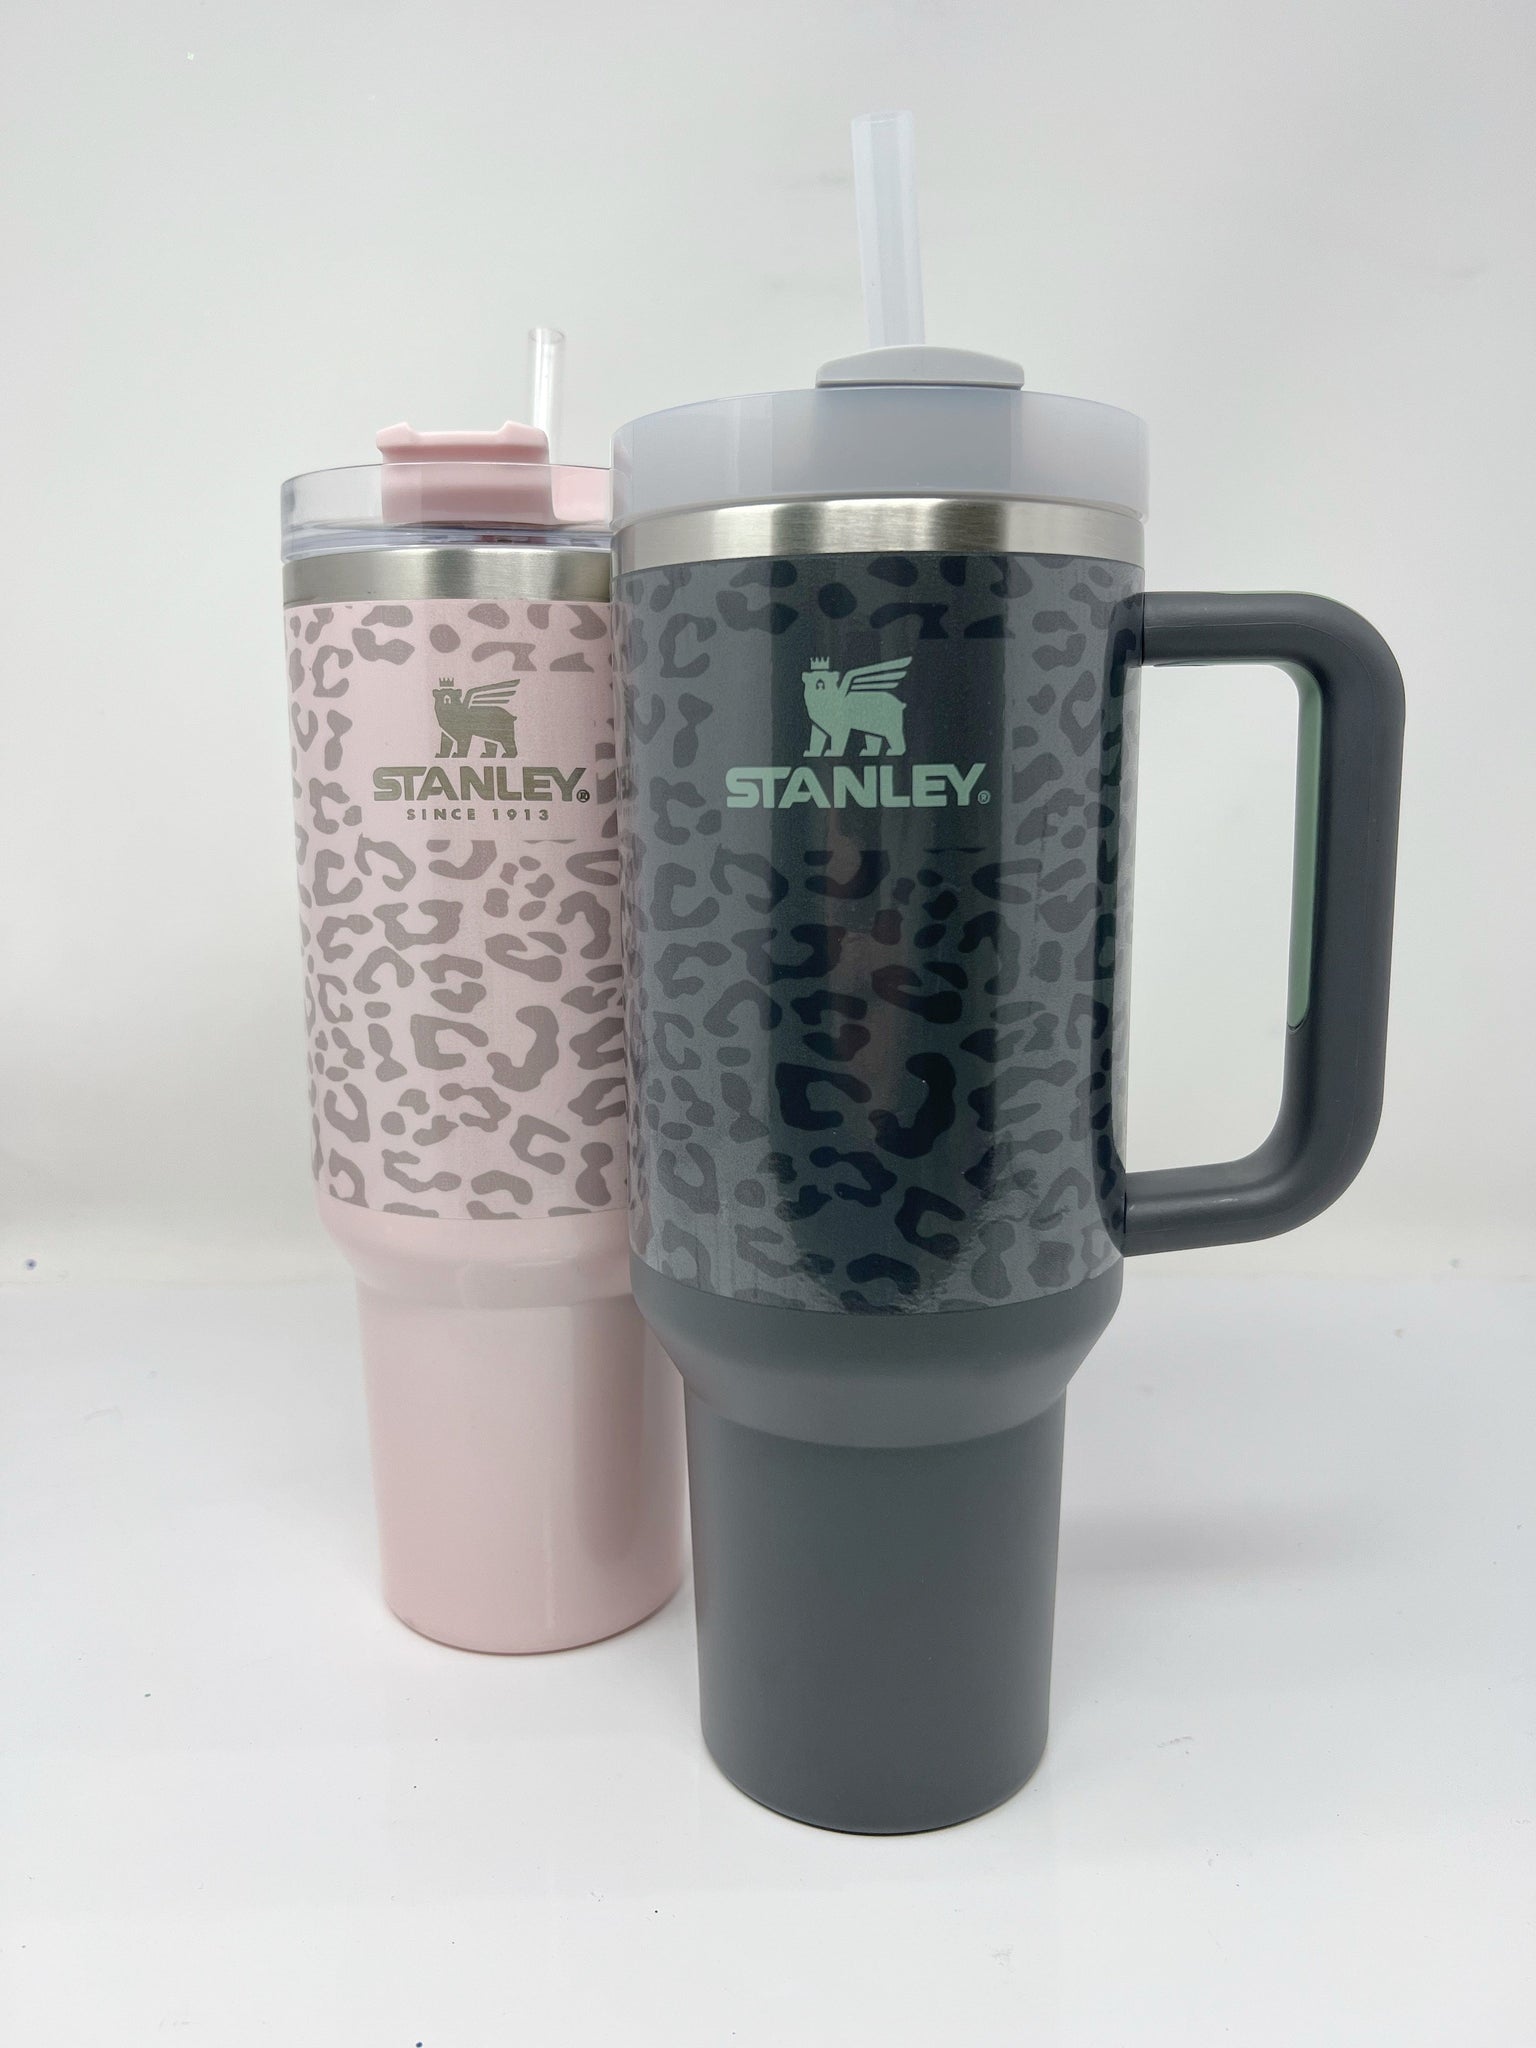 30oz. Stanley Vinyl Decal Cheetah Print Wrap Cow Print Stanley Wrap Cup Not  Included 